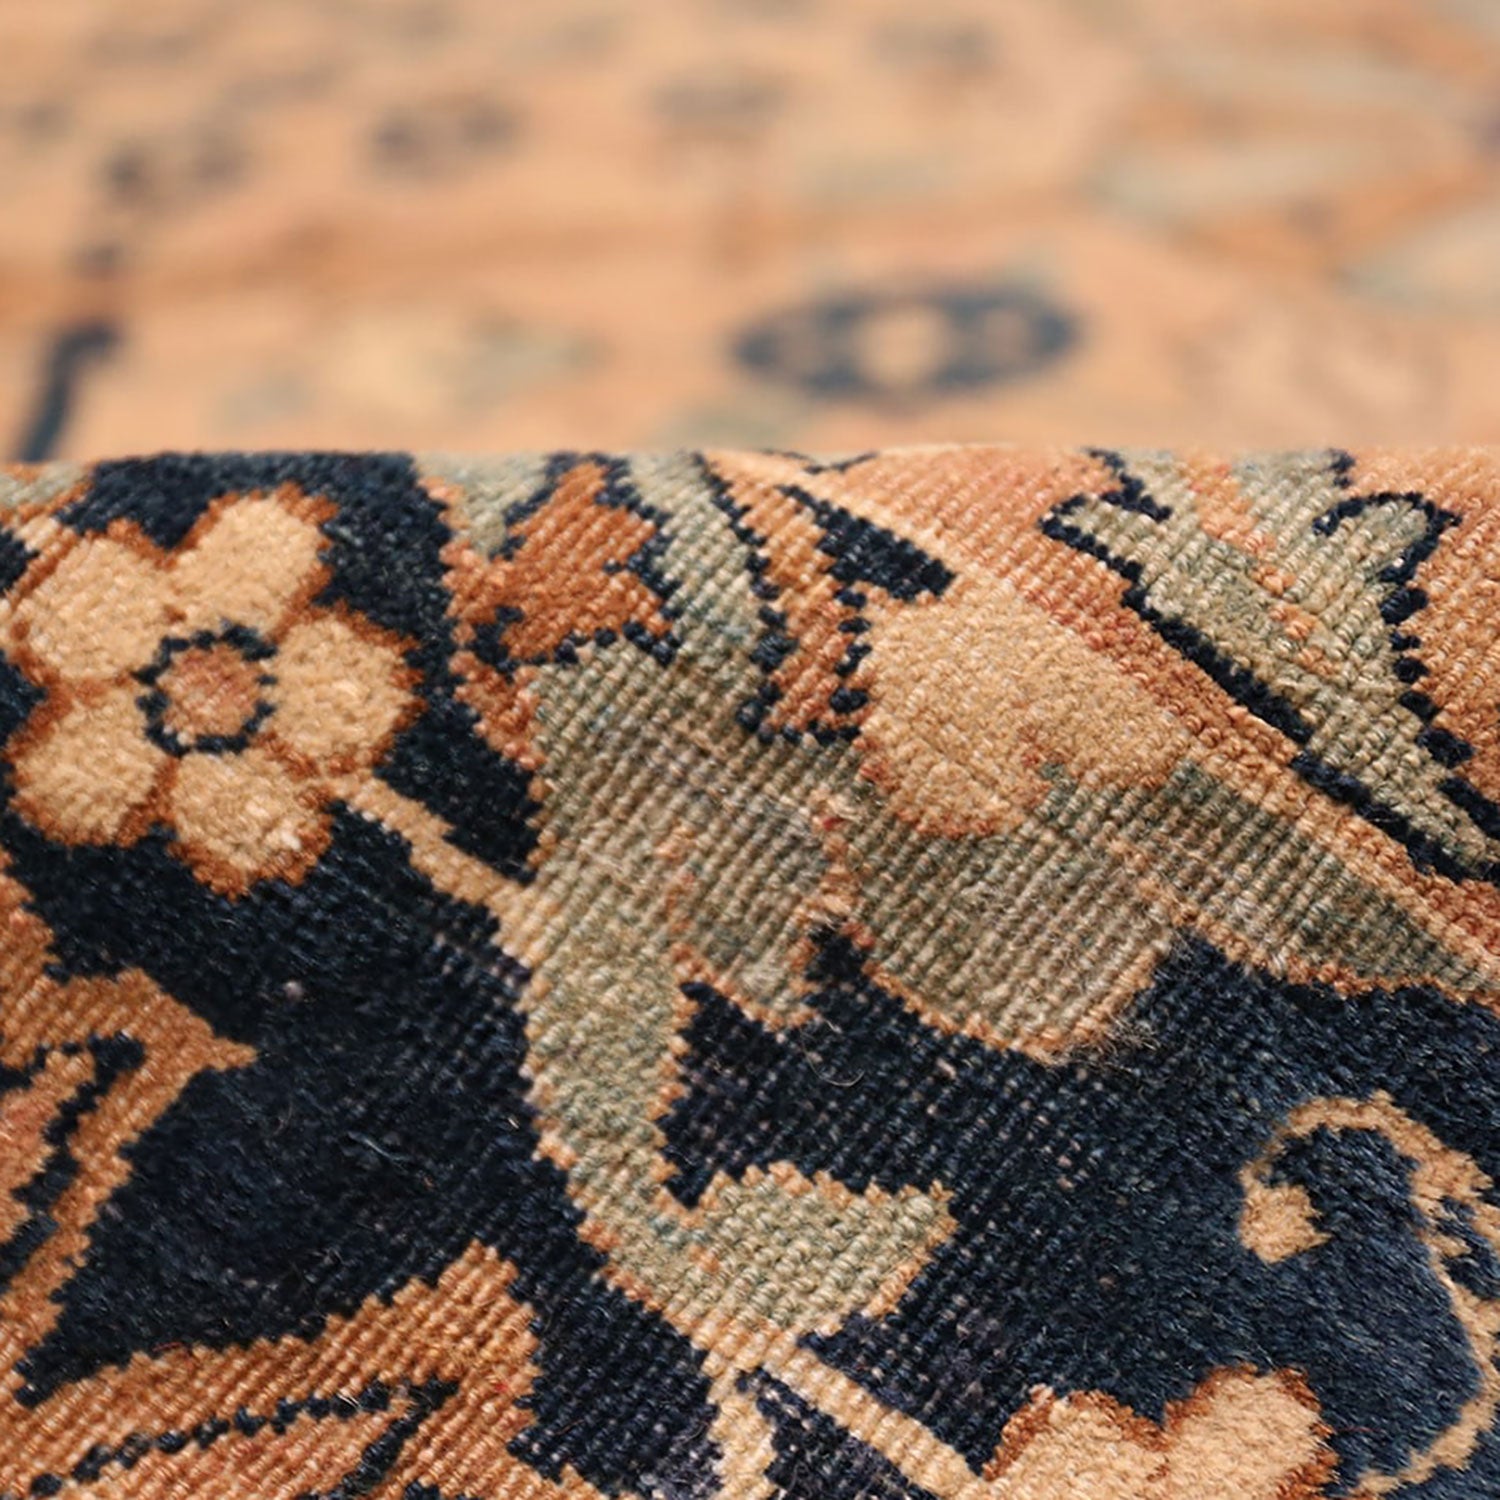 Close-up of a patterned carpet showcasing intricate floral motifs.